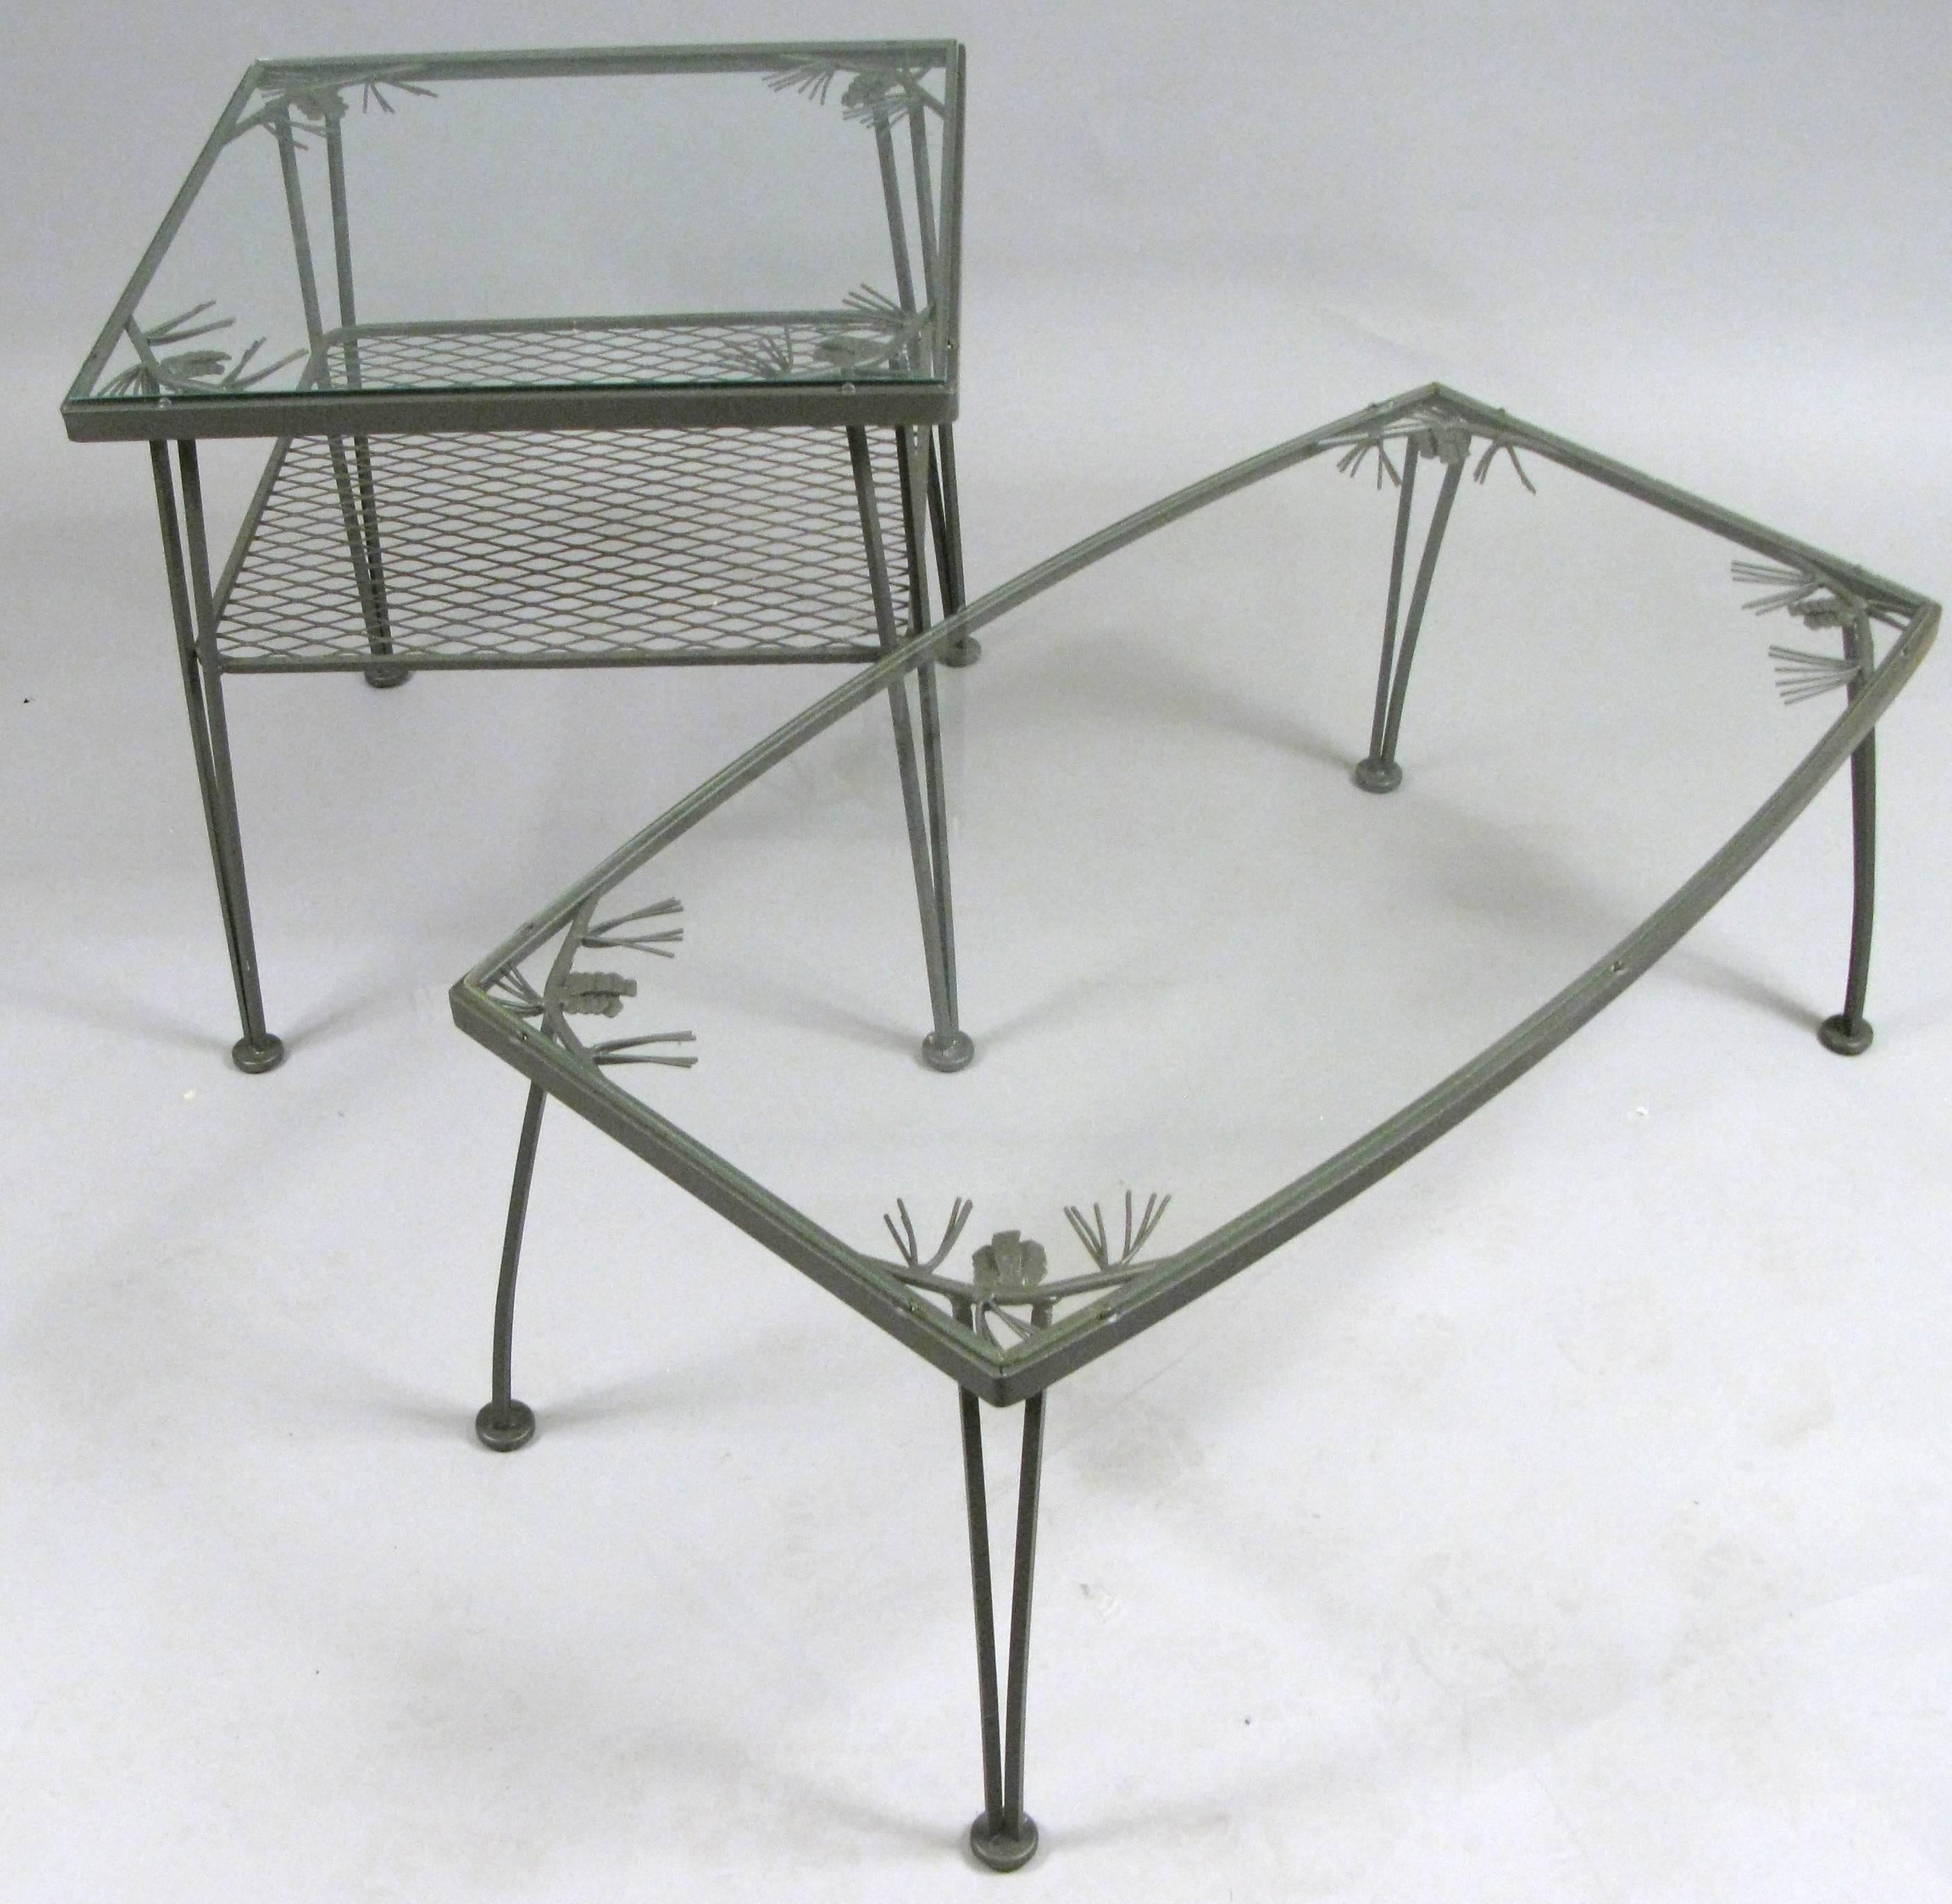 A companion pair of vintage 1950s wrought iron occasional tables from the Pinecrest collection by Woodard. The coffee table has a lozenge shape, with a glass top, and the square side table has a glass top and a lower shelf. Both tables have the